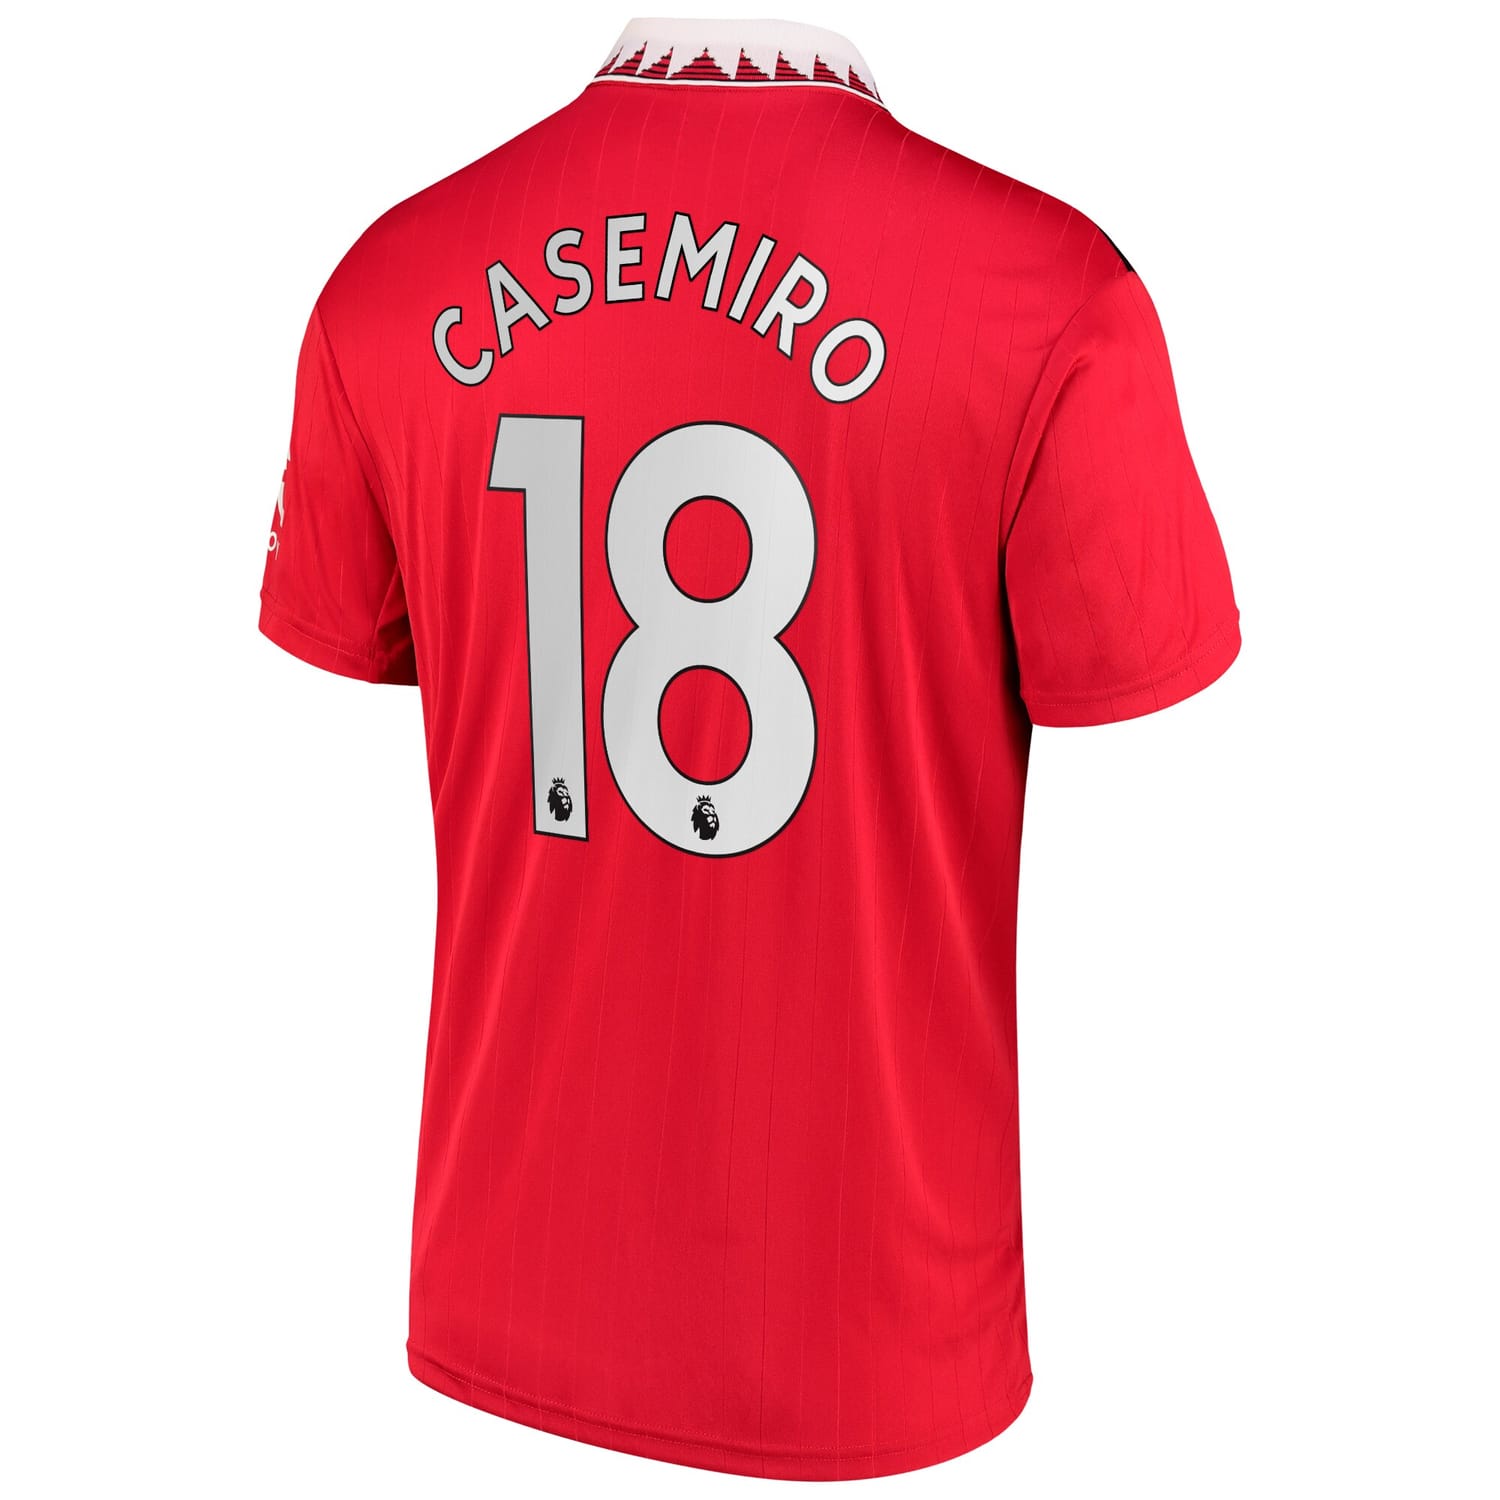 Premier League Manchester United Home Jersey Shirt Red 2022-23 player Casemiro printing for Men